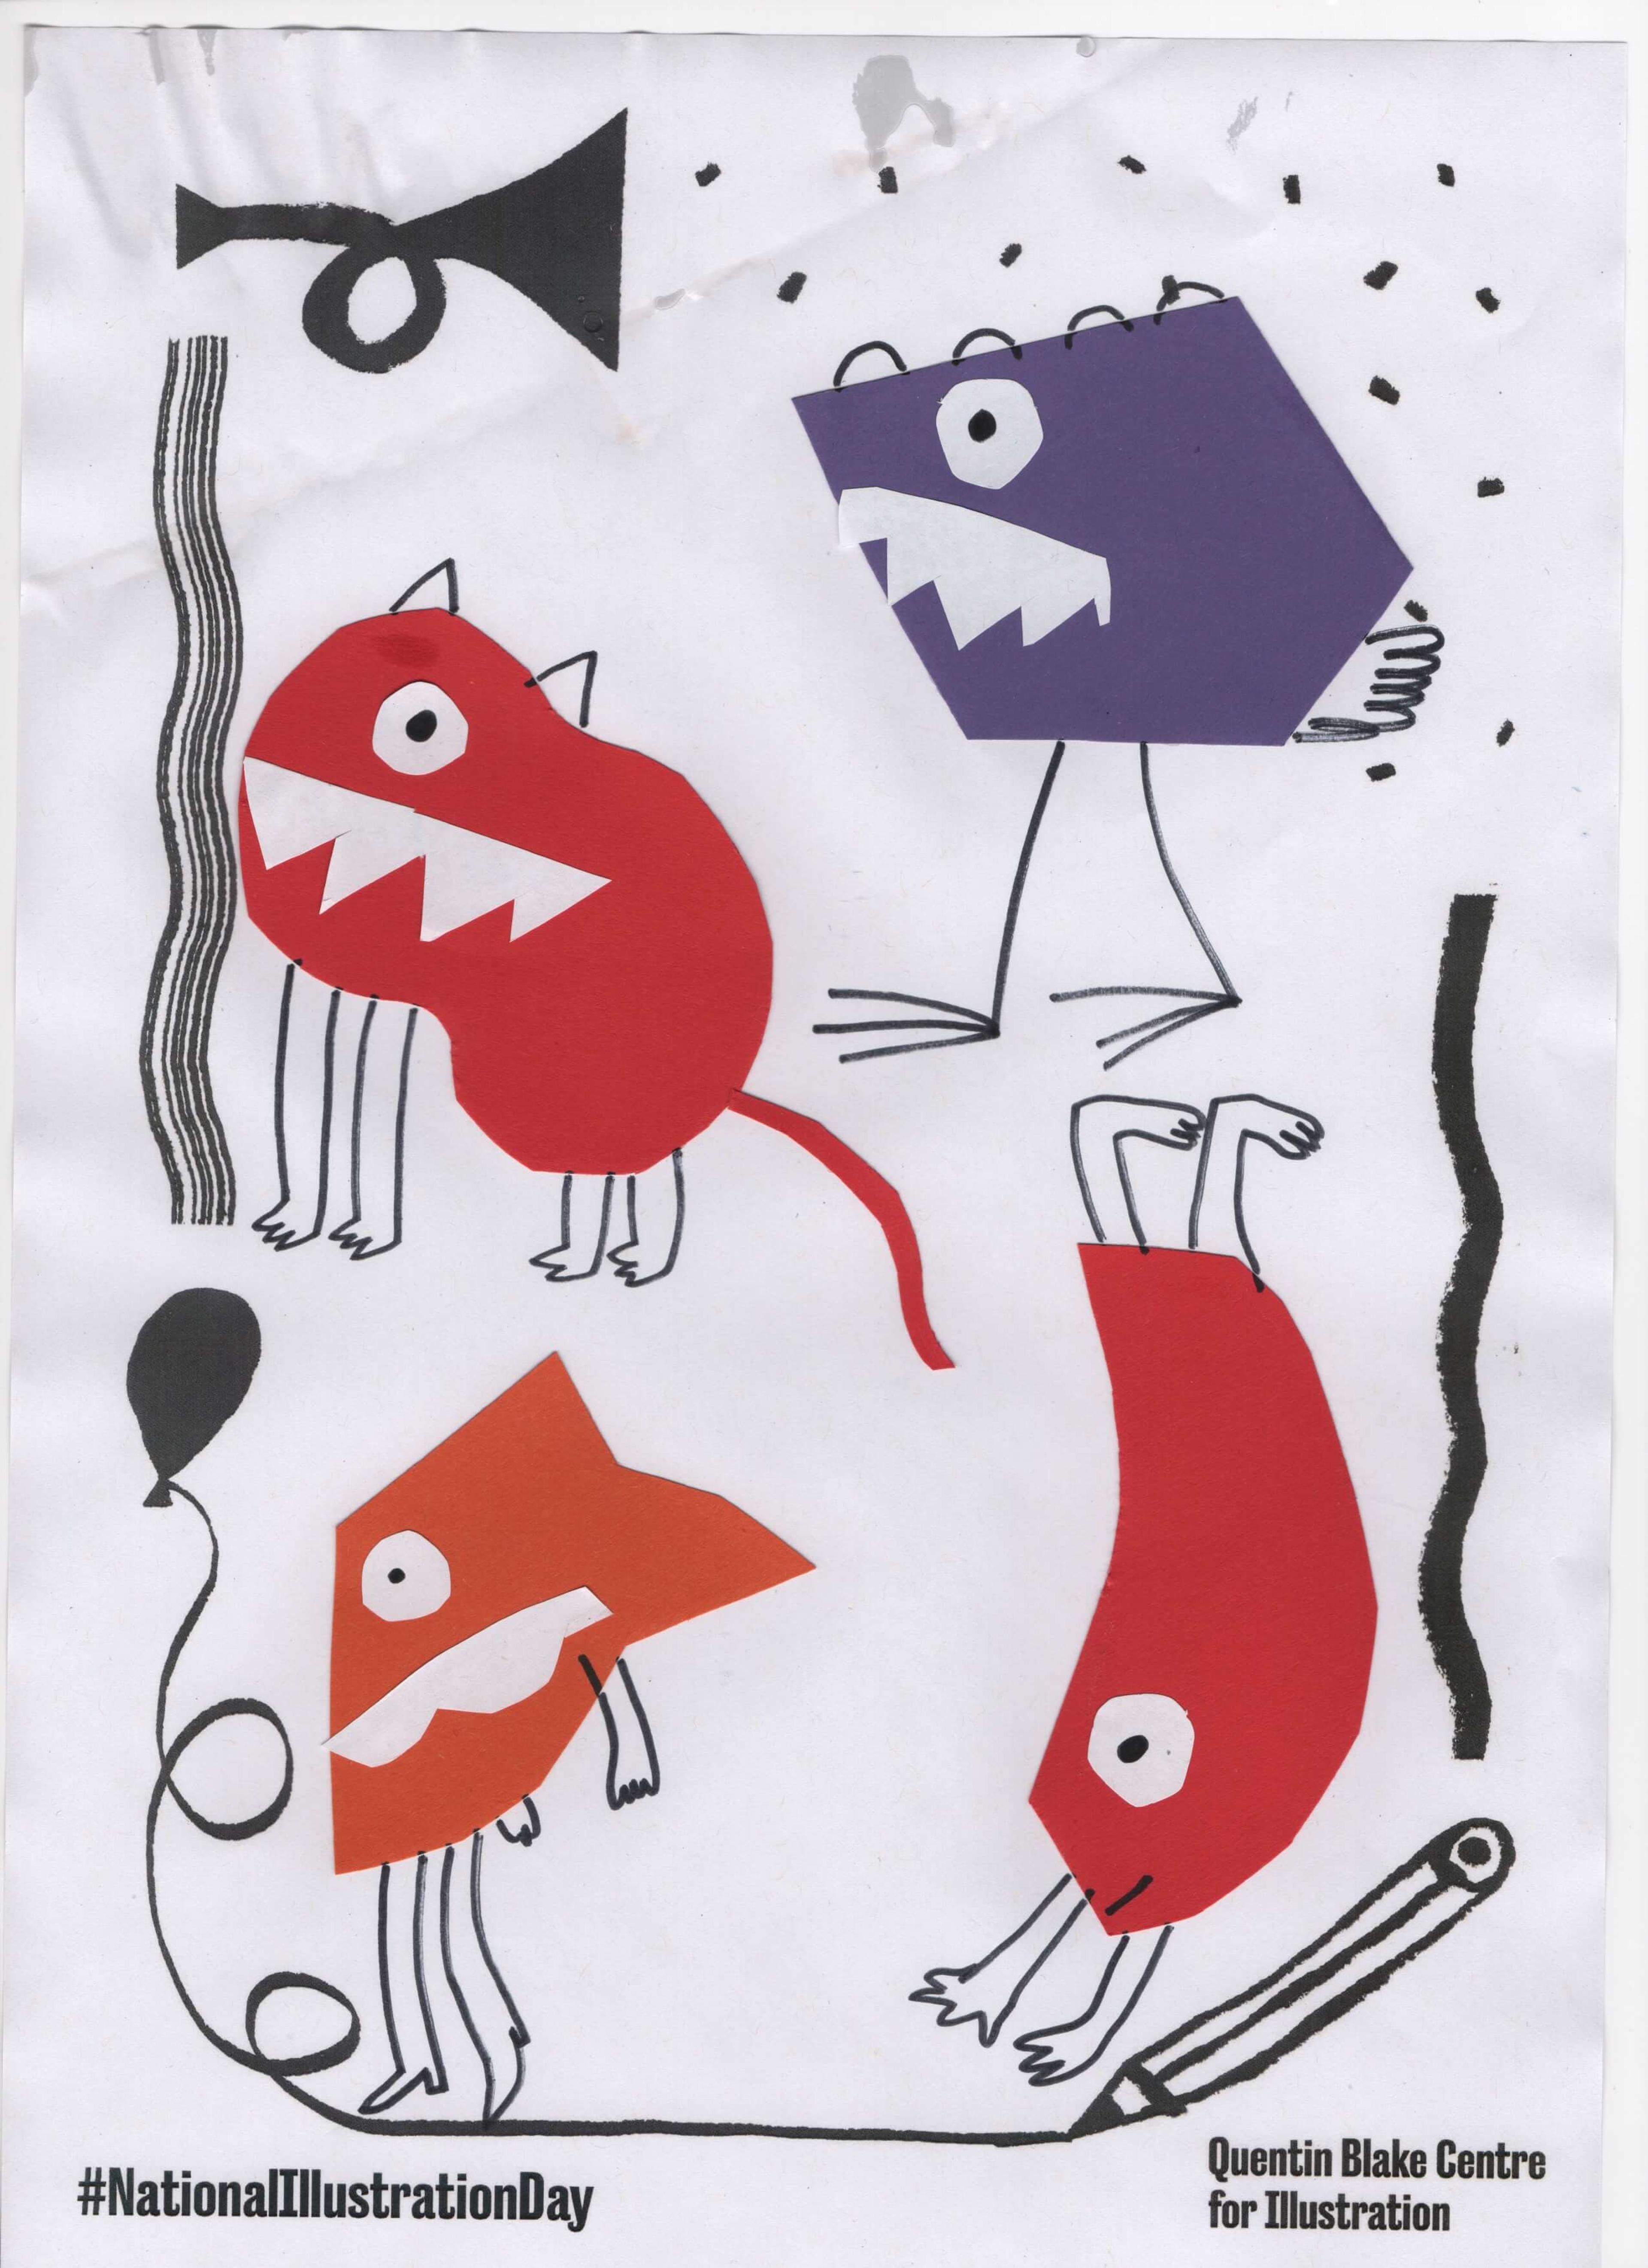 Cartoon monsters made using abstract cut-out shapes and features drawn using markers.